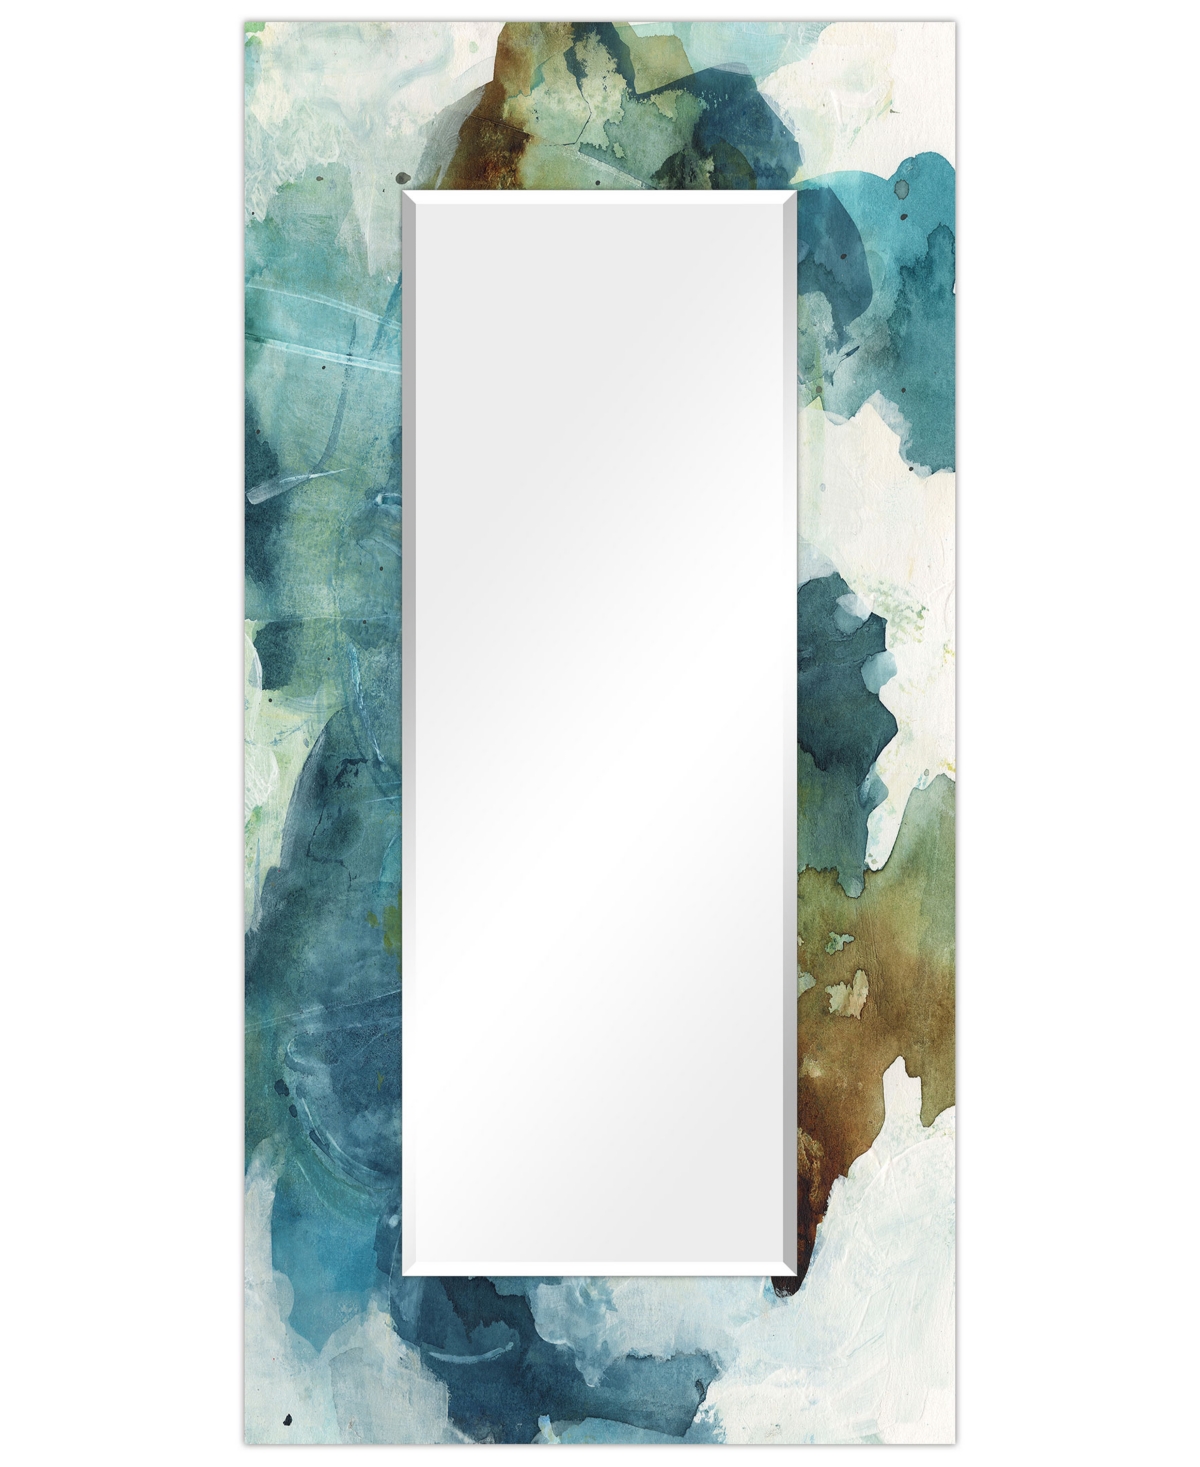 Empire Art Direct "blue Sky" Rectangular Beveled Mirror On Free Floating Printed Tempered Art Glass, 72" X 36" X 0.4" In Green